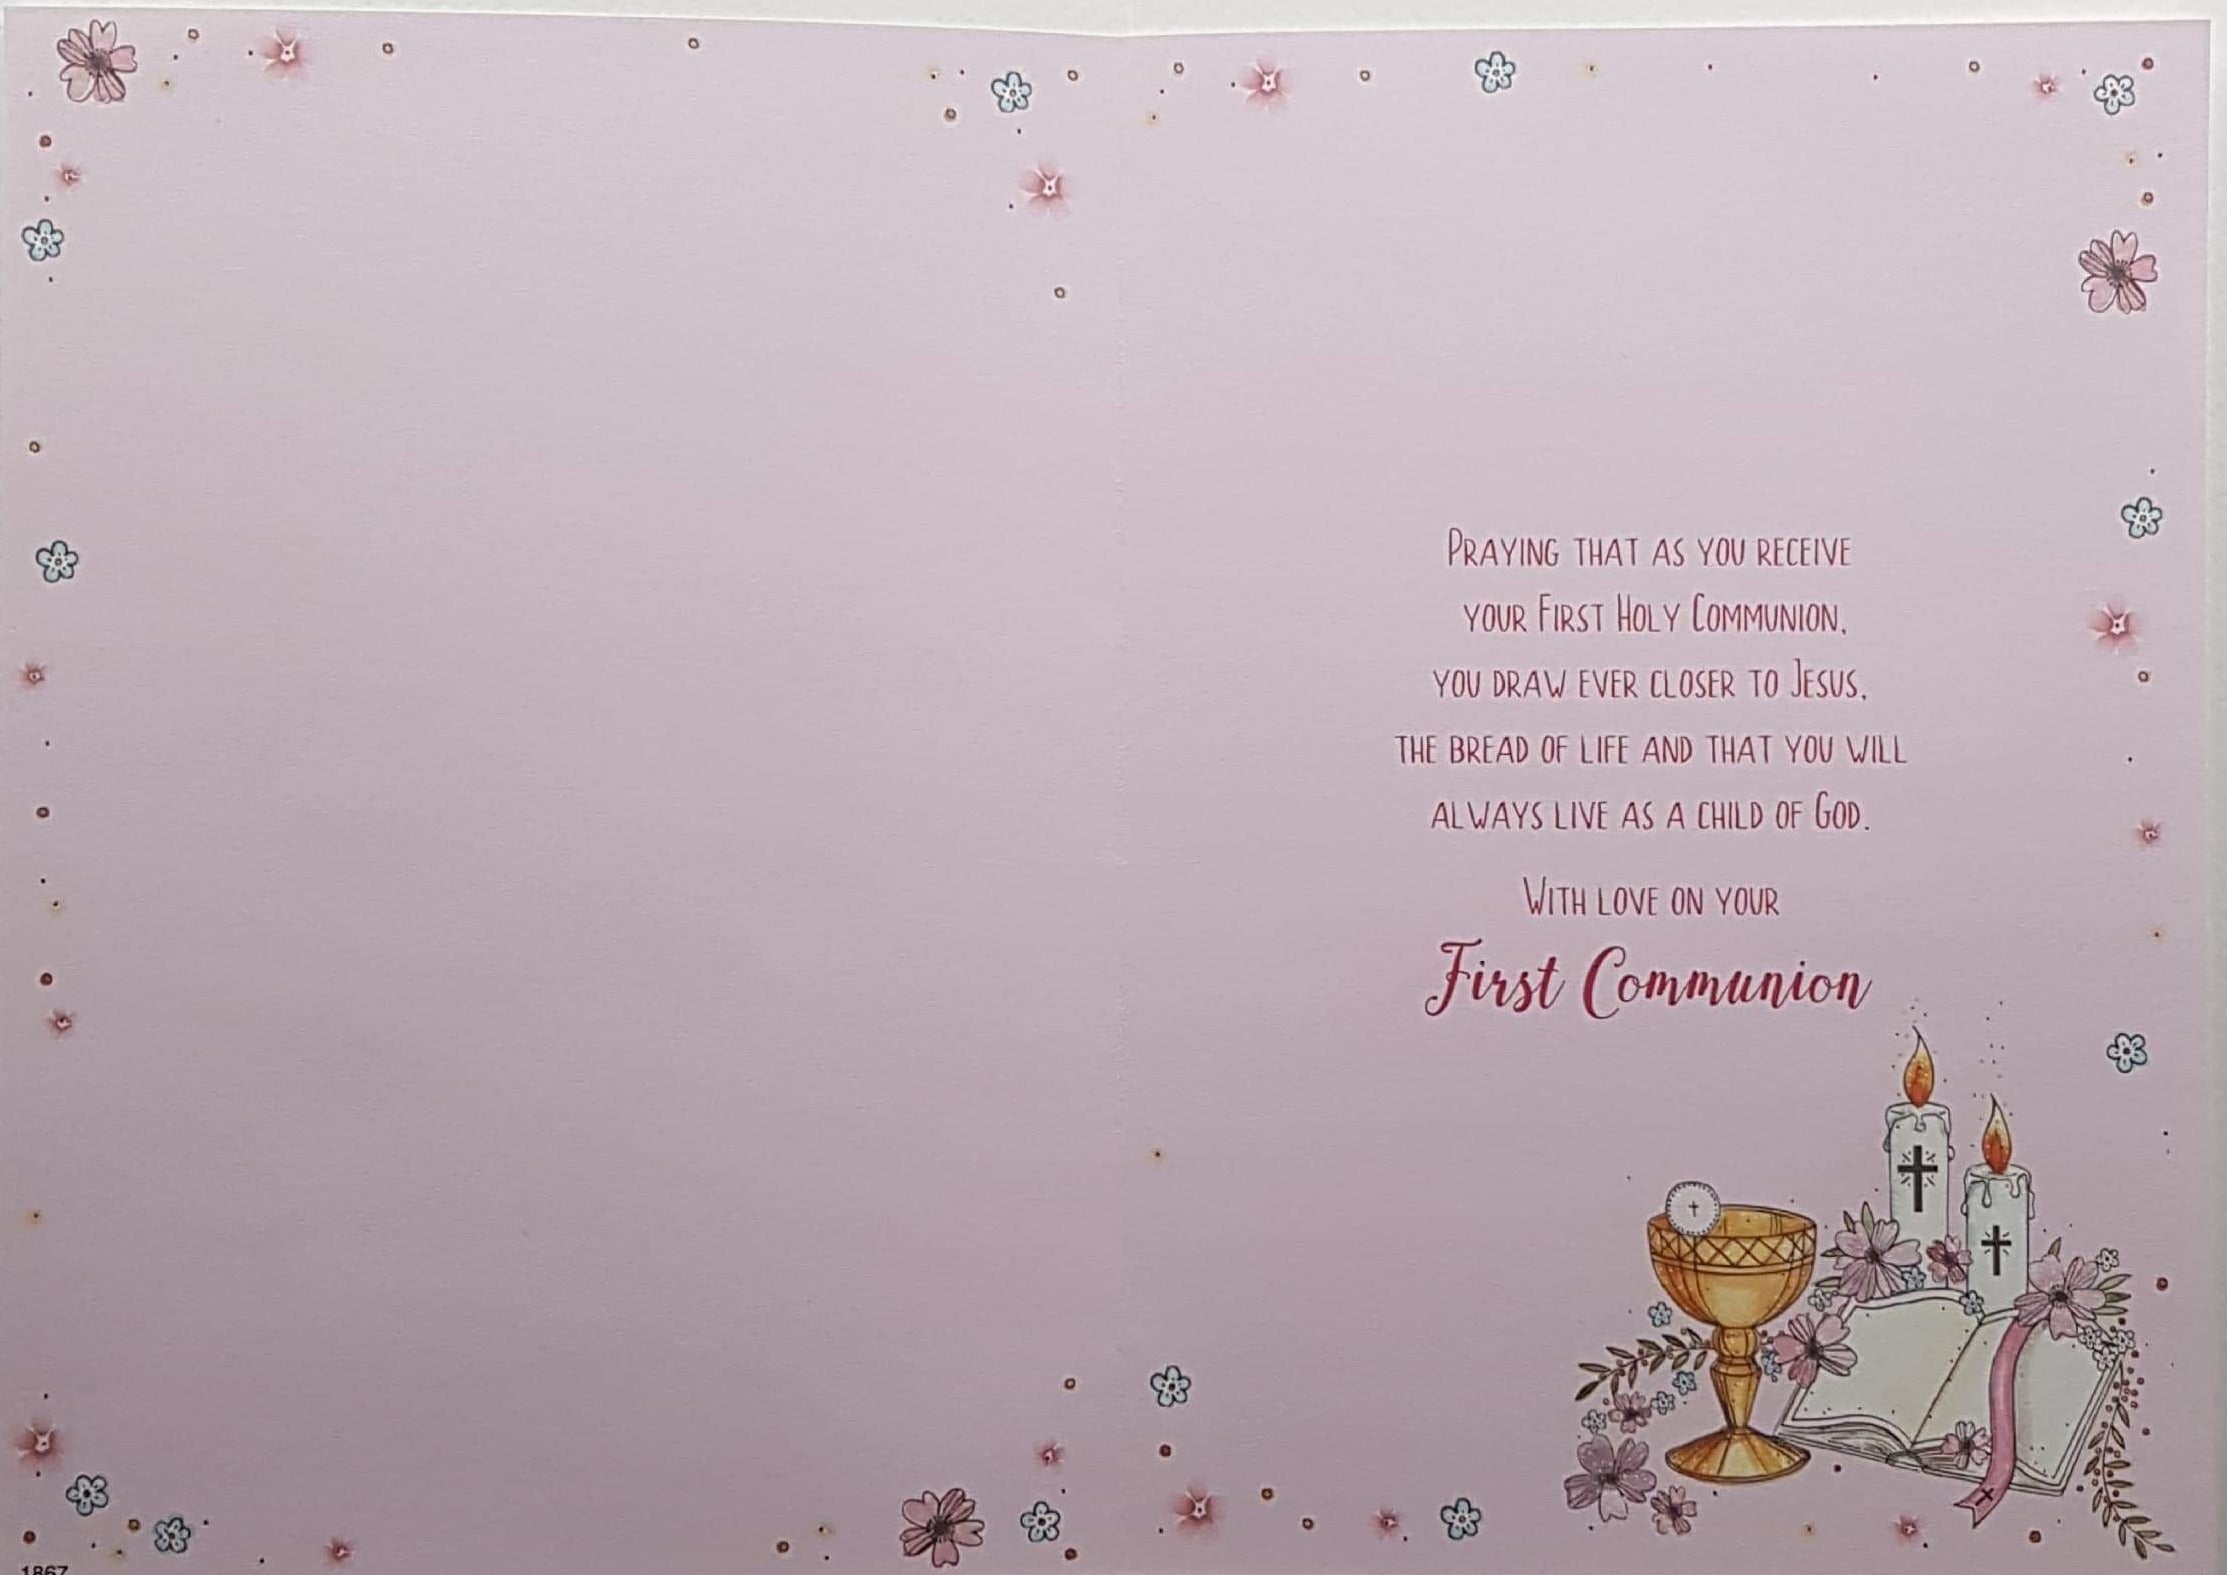 Communion Card - Daughter - For A Special Daughter - Chalice, bible & Candles with Pink Flowers